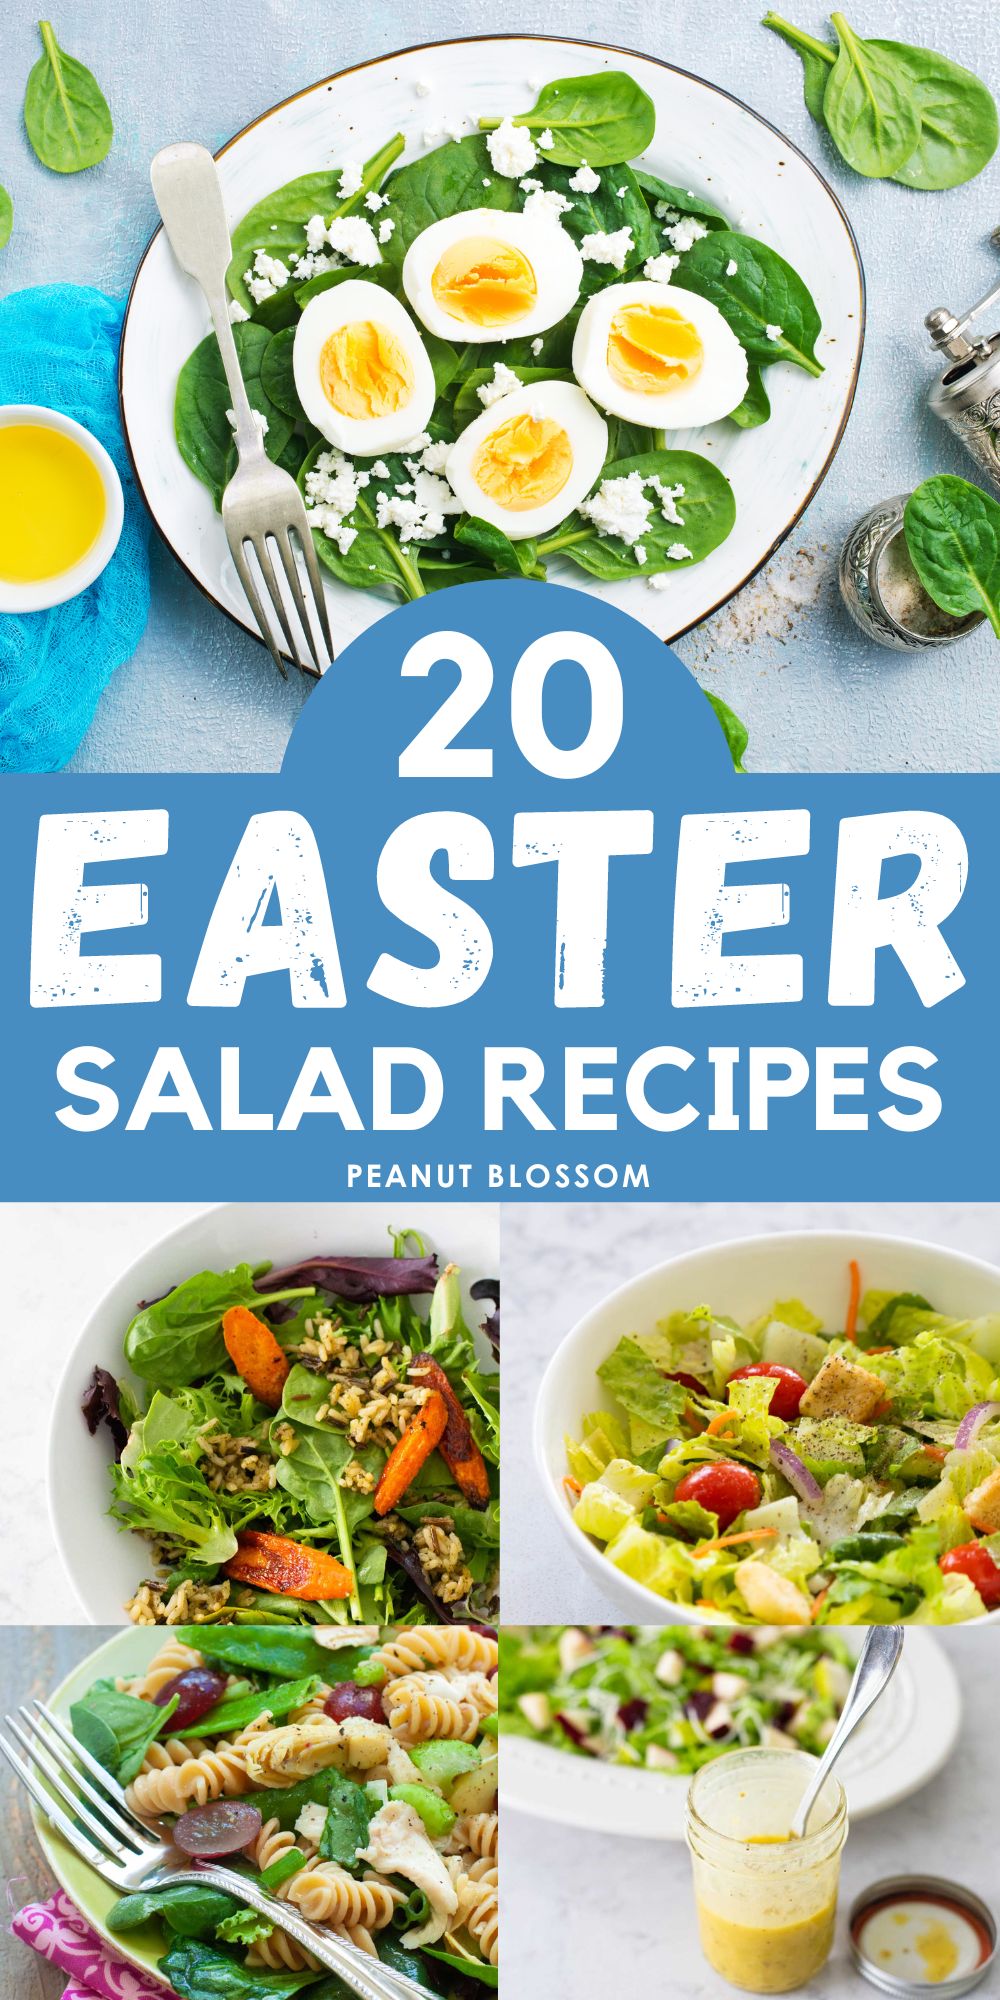 The photo collage shows four easy salads for Easter.